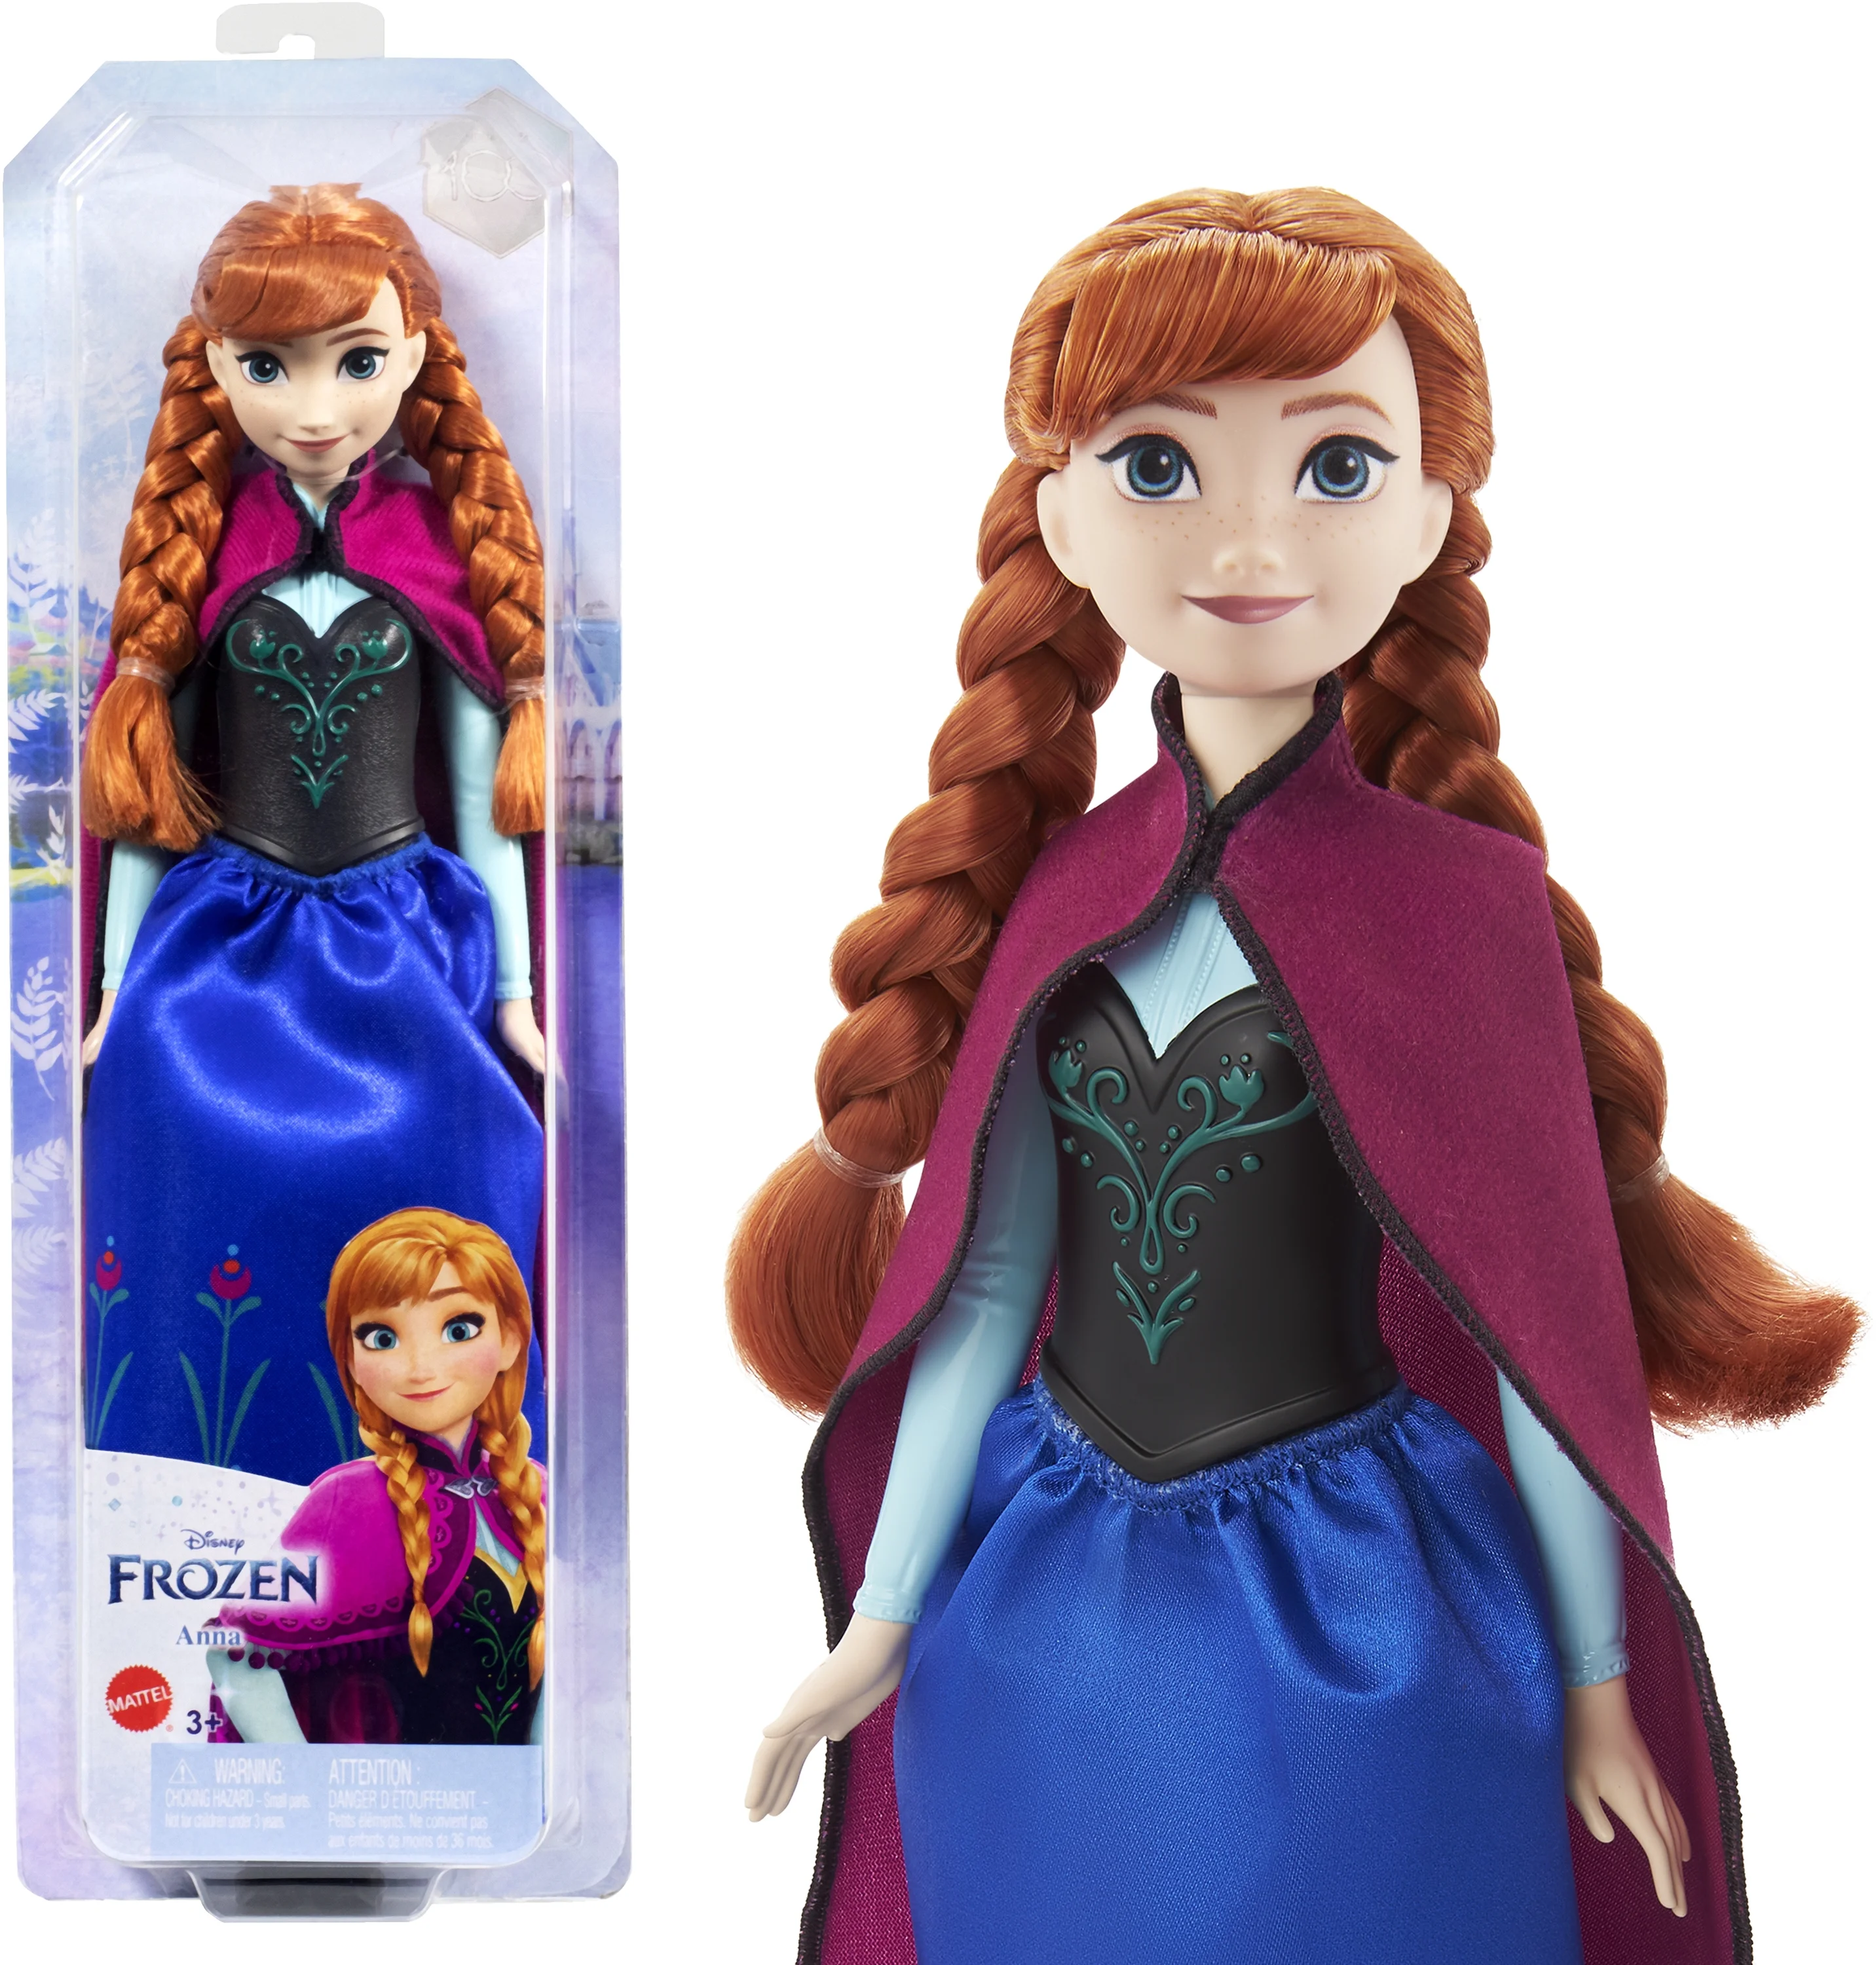 Disney Frozen Anna 11 inch Fashion Doll & Accessory, Toy Inspired by the Movie Disney Frozen